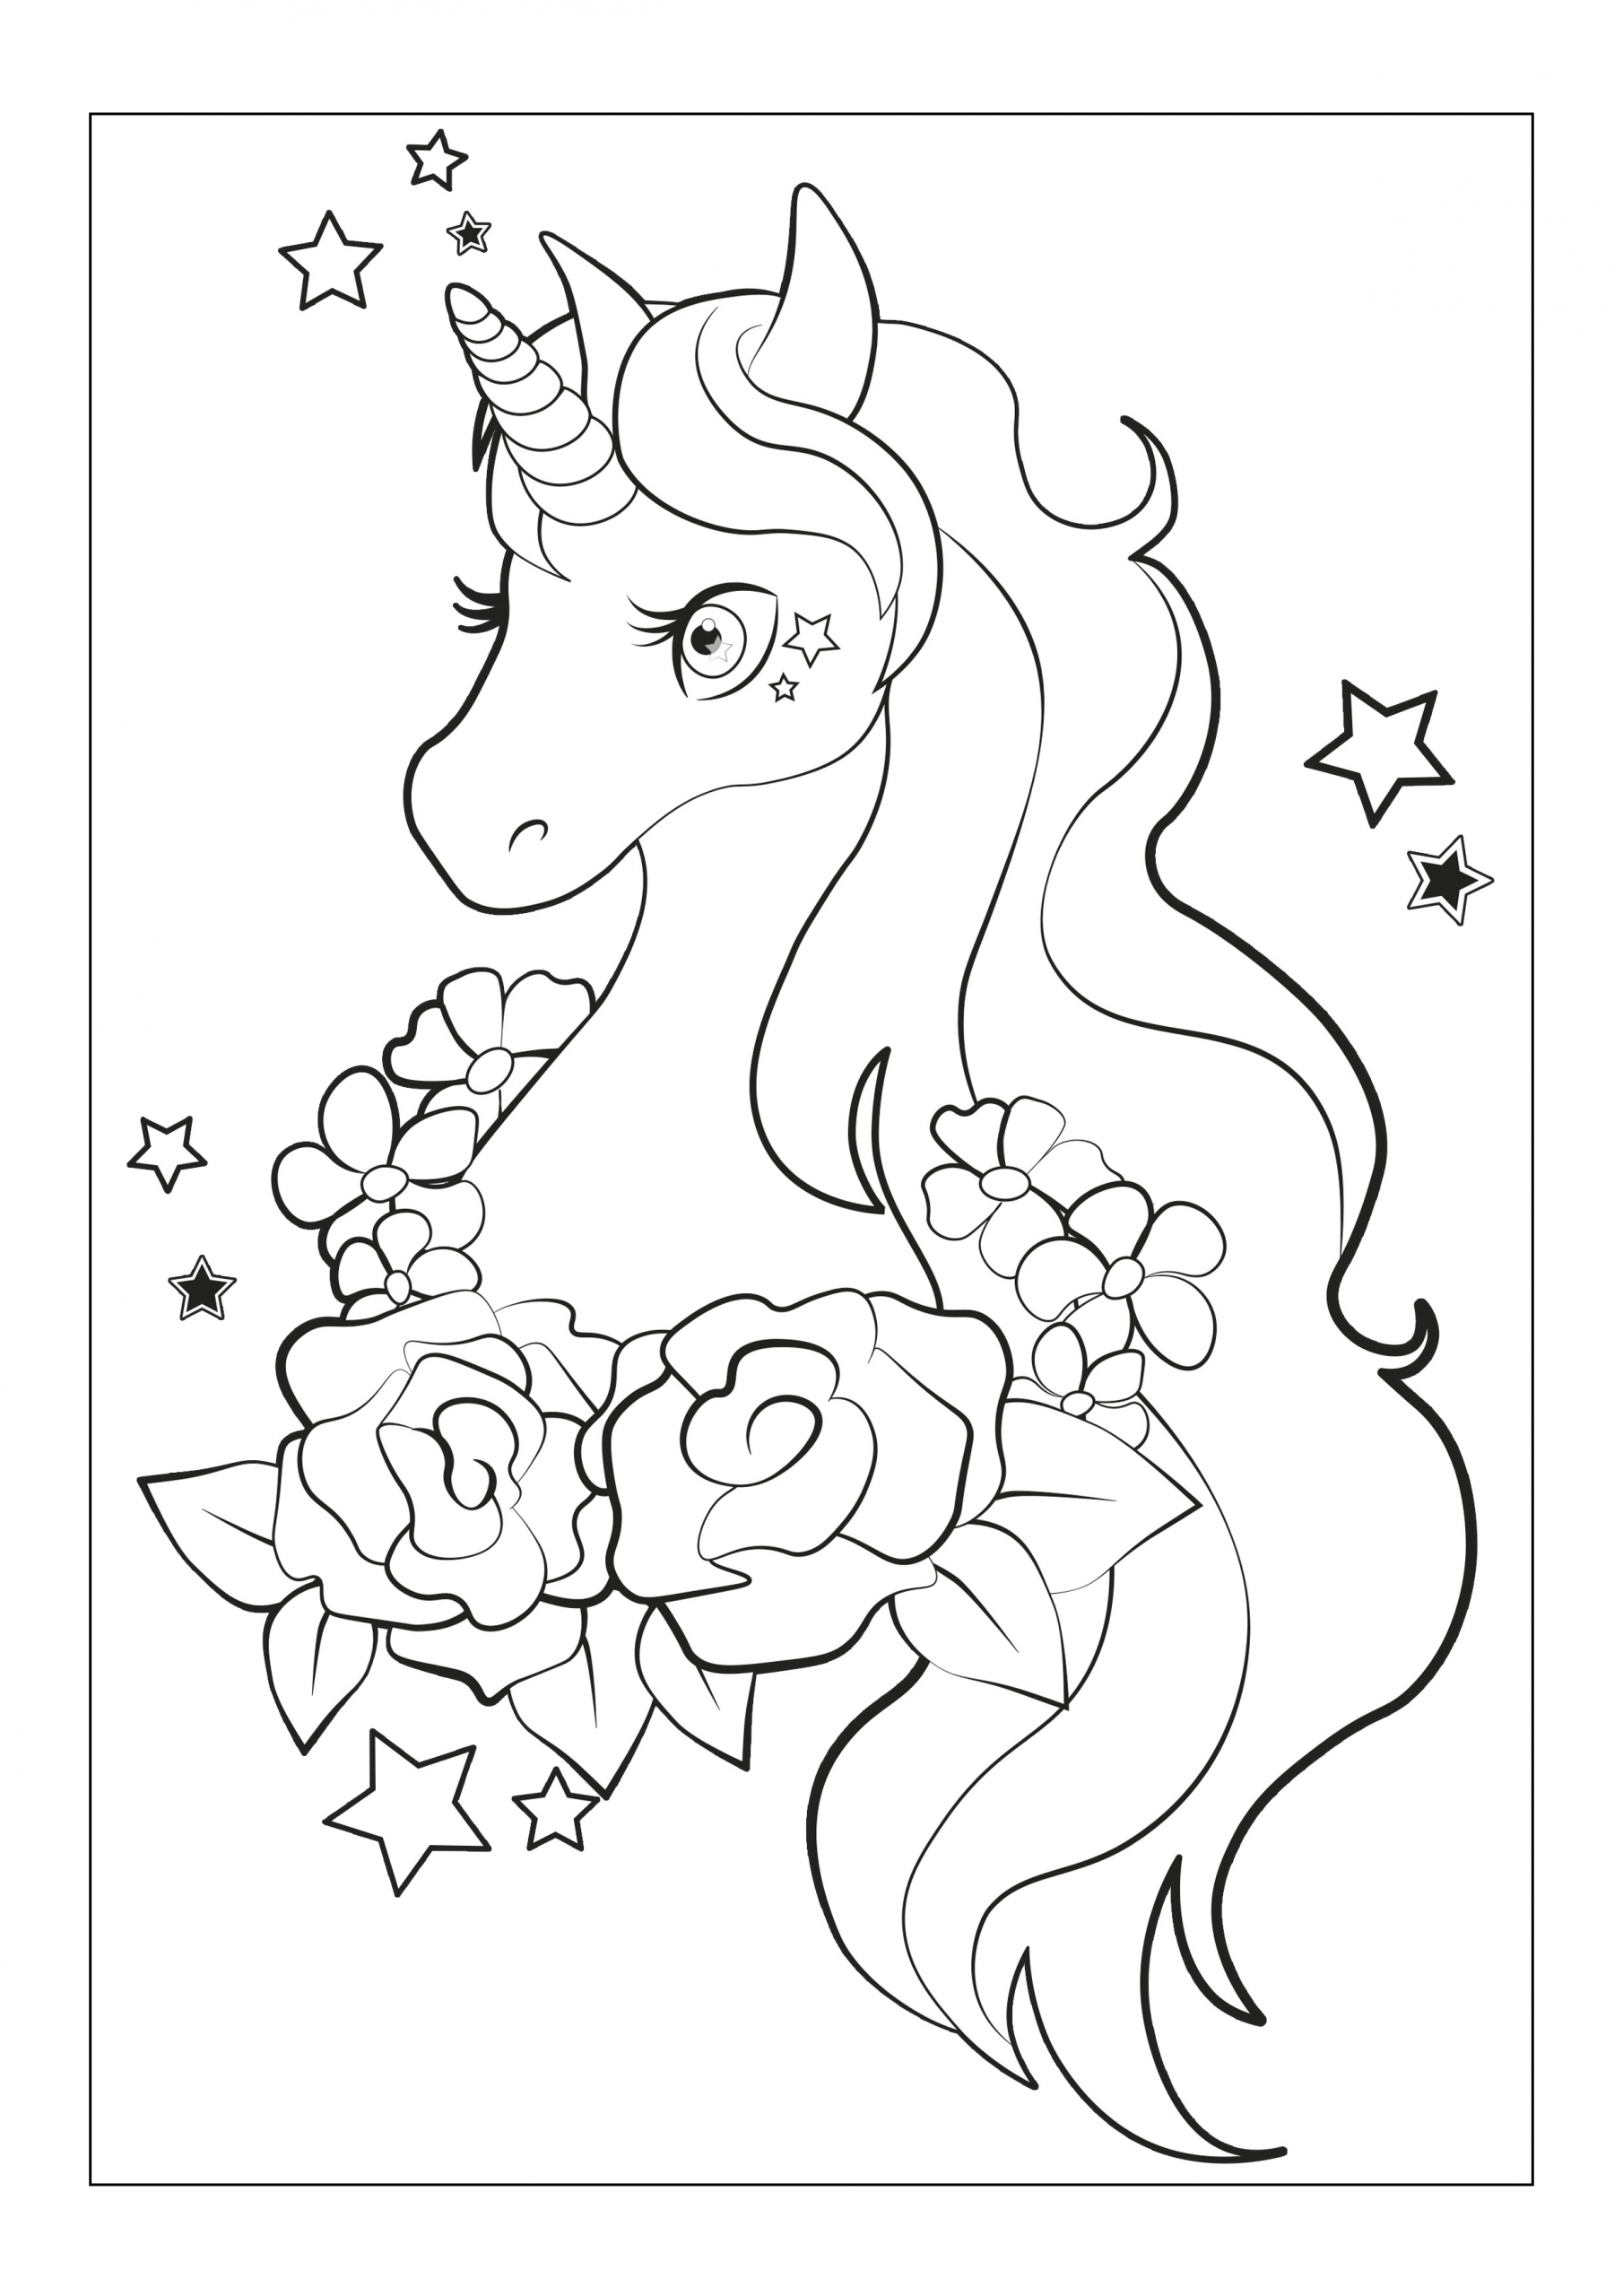 Printable Coloring Pages For Girls
 The Best Free Coloring Pages For Girls